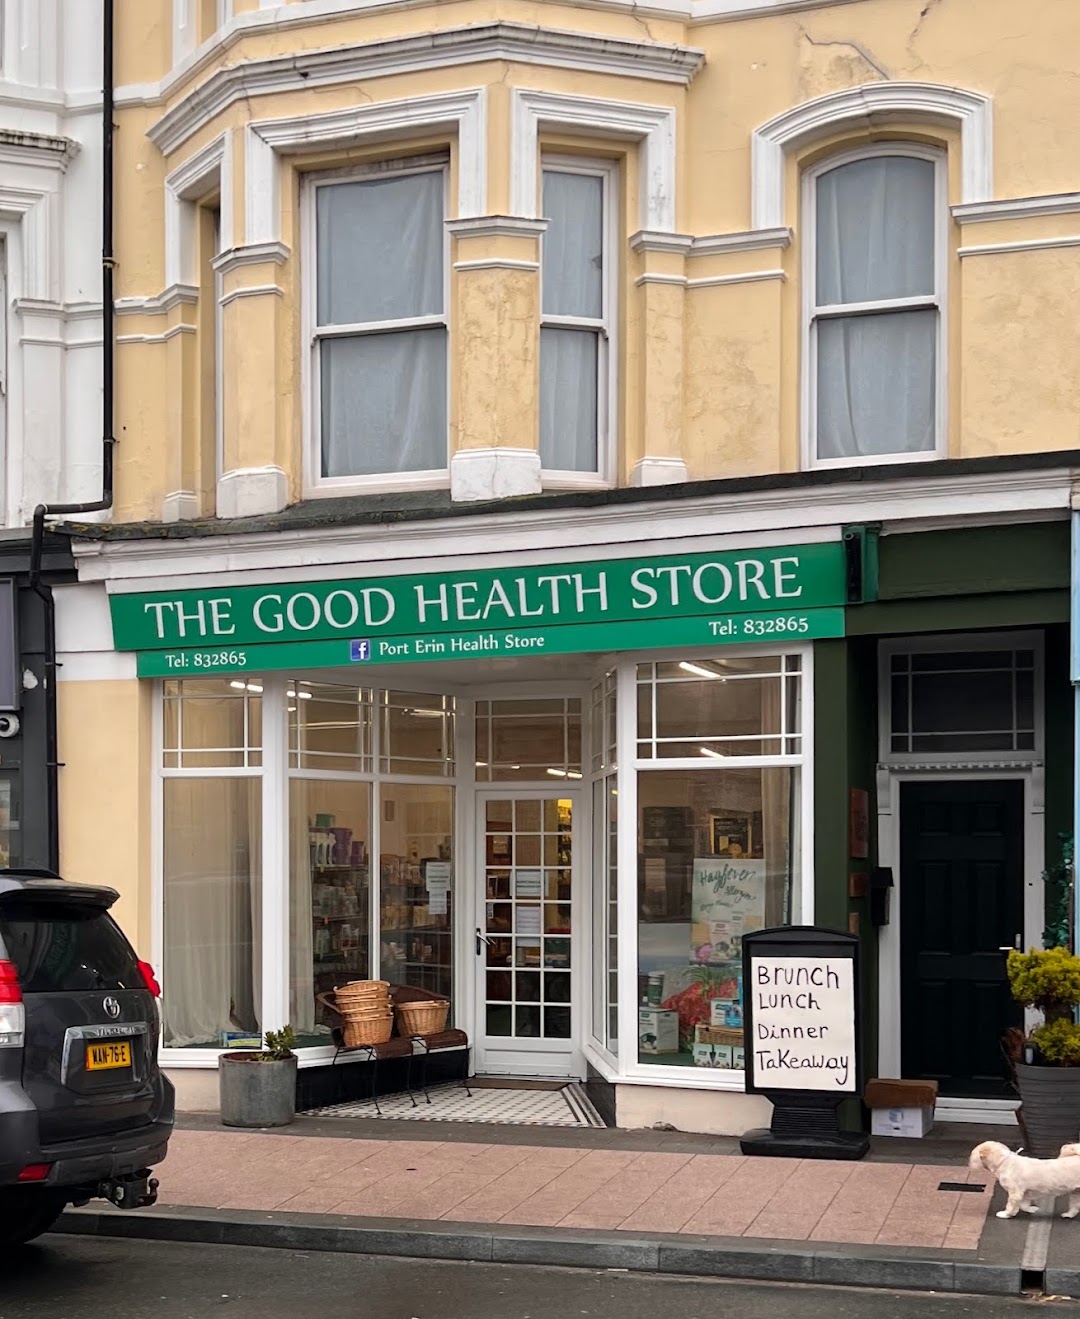 The Good Health Store